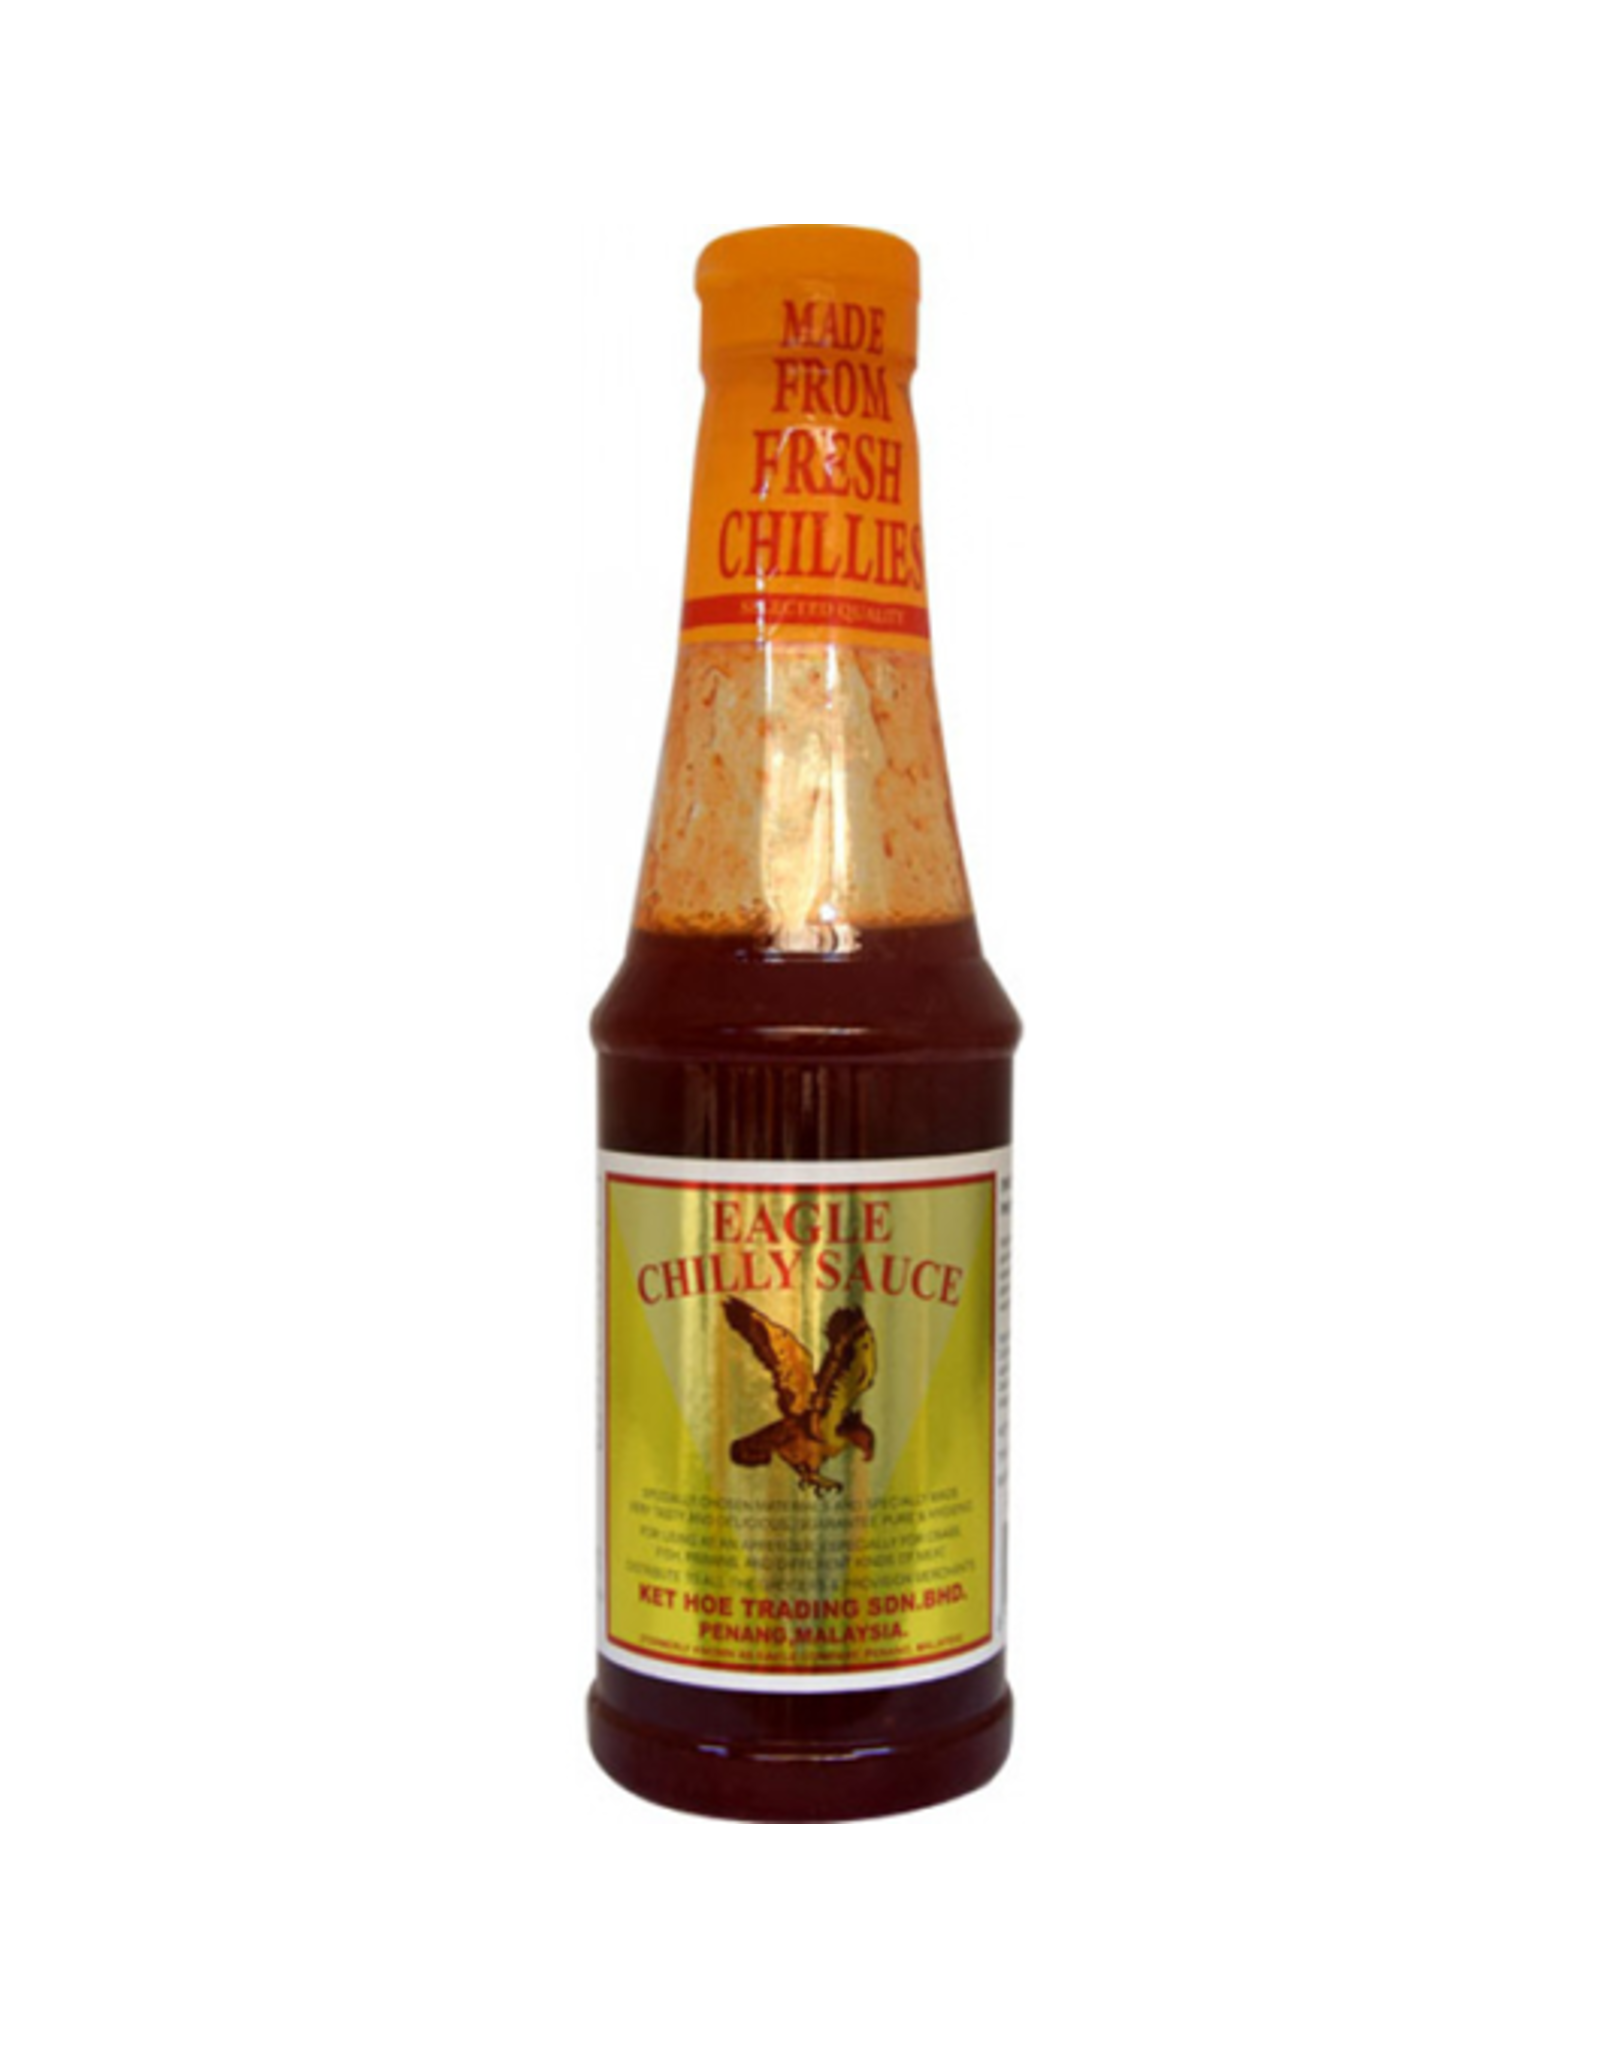 Eagle Chilly Sauce